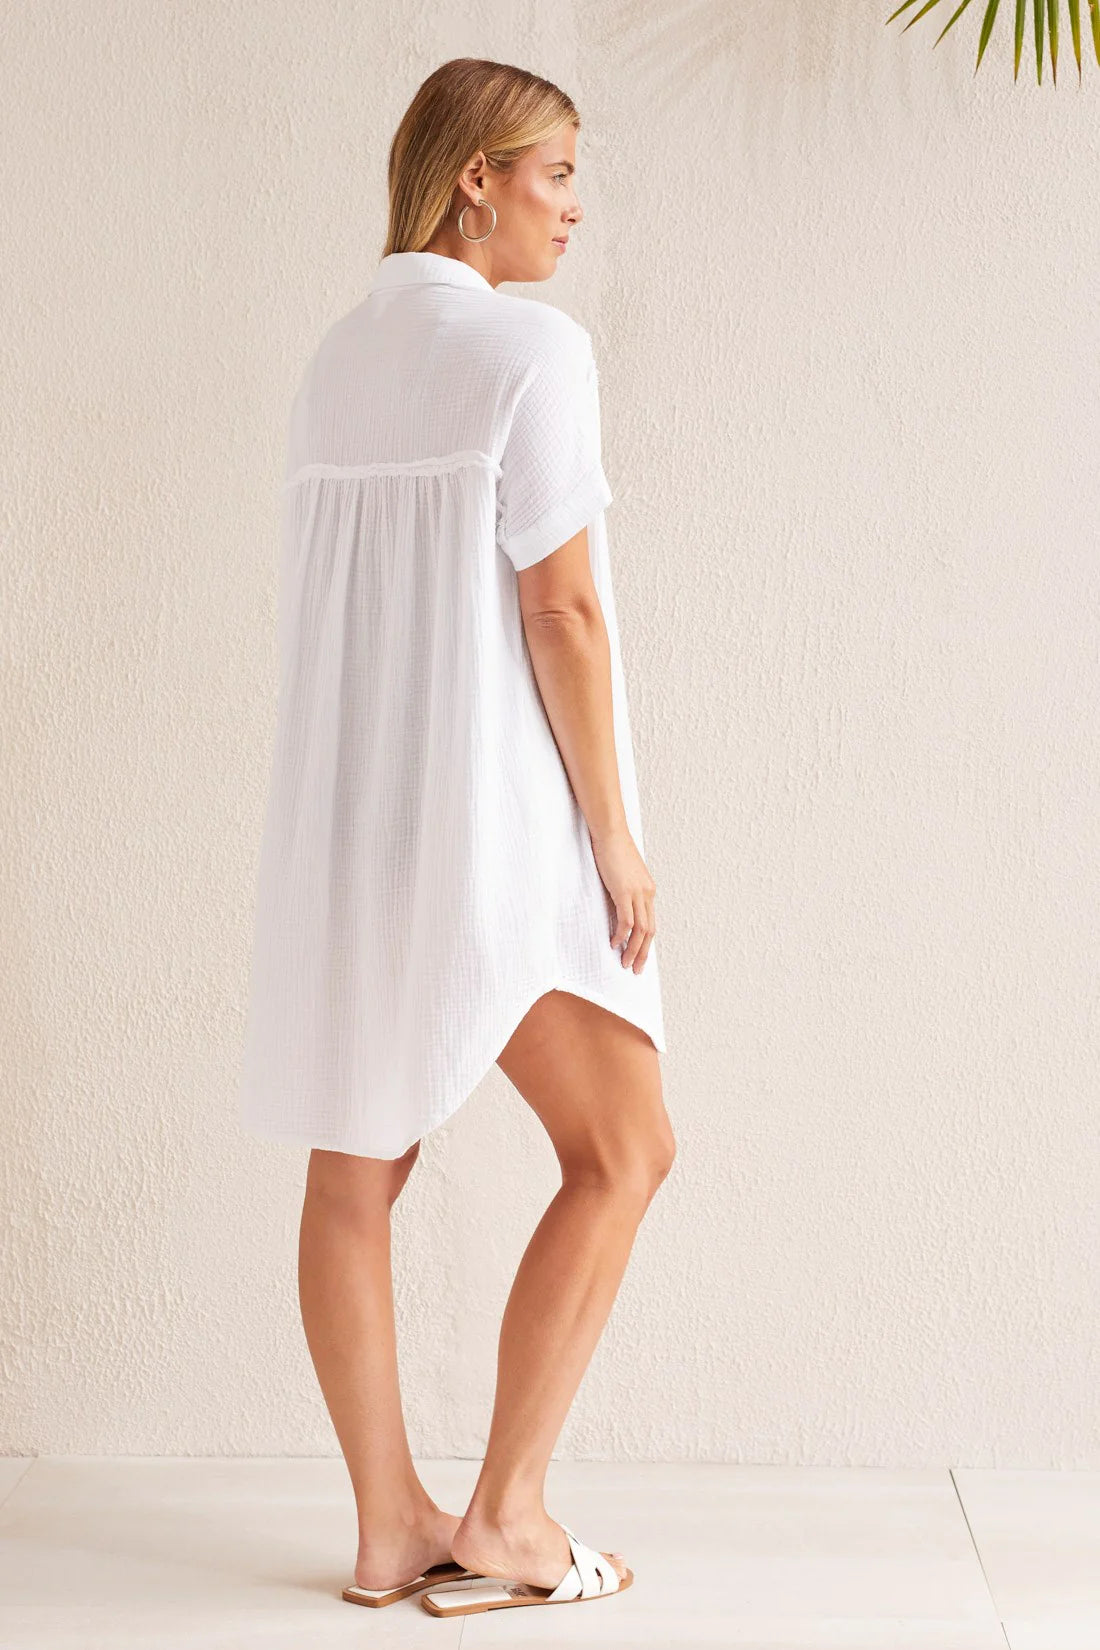 Elevate your sunny day style with this shirt dress made from crinkled gauze fabric that's lightweight and flowy.